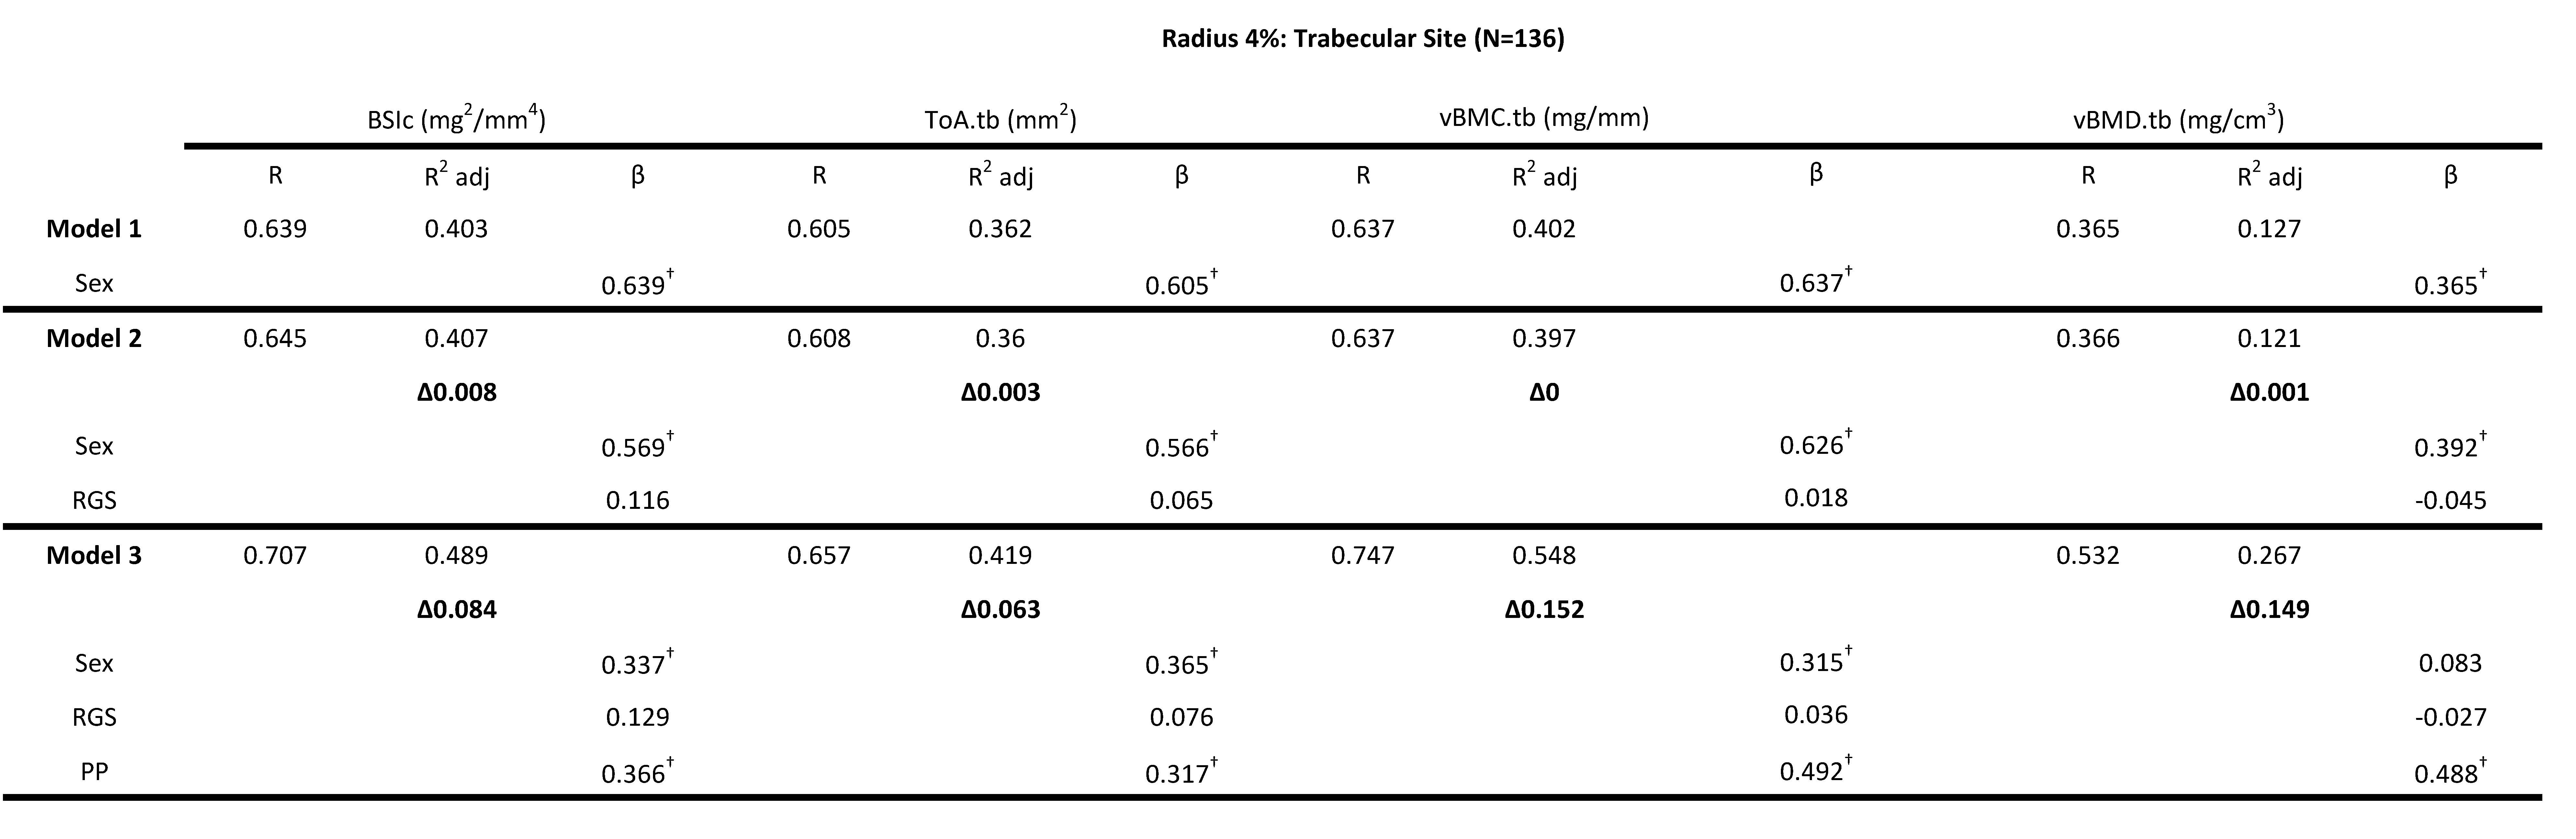 <b>Table 2</b>: Hierarchical multiple regression (HMR) analyses for predicting Bone Strength Index, BSIc (mg<sup>2</sup>/mm<sup>4</sup>), Total Area ToA.tb (mm<sup>2</sup>), Bone Mineral Content, vBMC.tb (mg/mm) and Bone Mineral Density vBMD.tb (mg/cm<sup>3</sup>) at the 4\% radial site using sex, relative grip strength (RGS) and peak power (PP) as predictor variables.  &beta; is the Standardized beta coefficient indicates the predictive power. Adjusted coefficient of determination (R<sup>2</sup> Adj) provides the amount of variation explained by the regression model. &Delta; indicates change in R<sup>2</sup> from model 1 (bold). &dagger; Indicates a significant &beta;